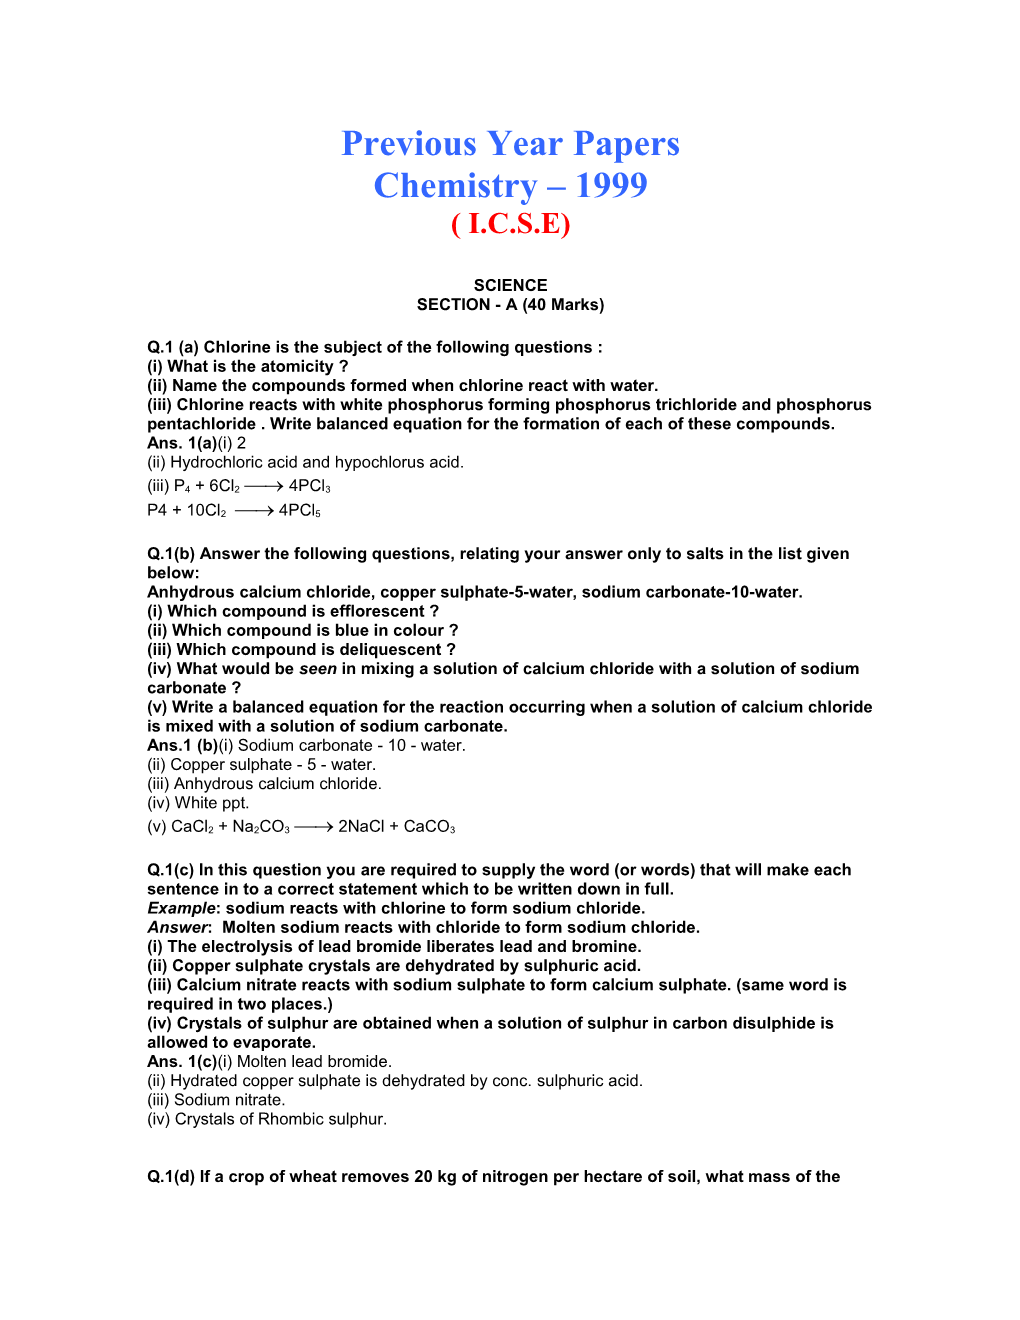 Previous Year Papers Chemistry 1999 ( I.C.S.E)